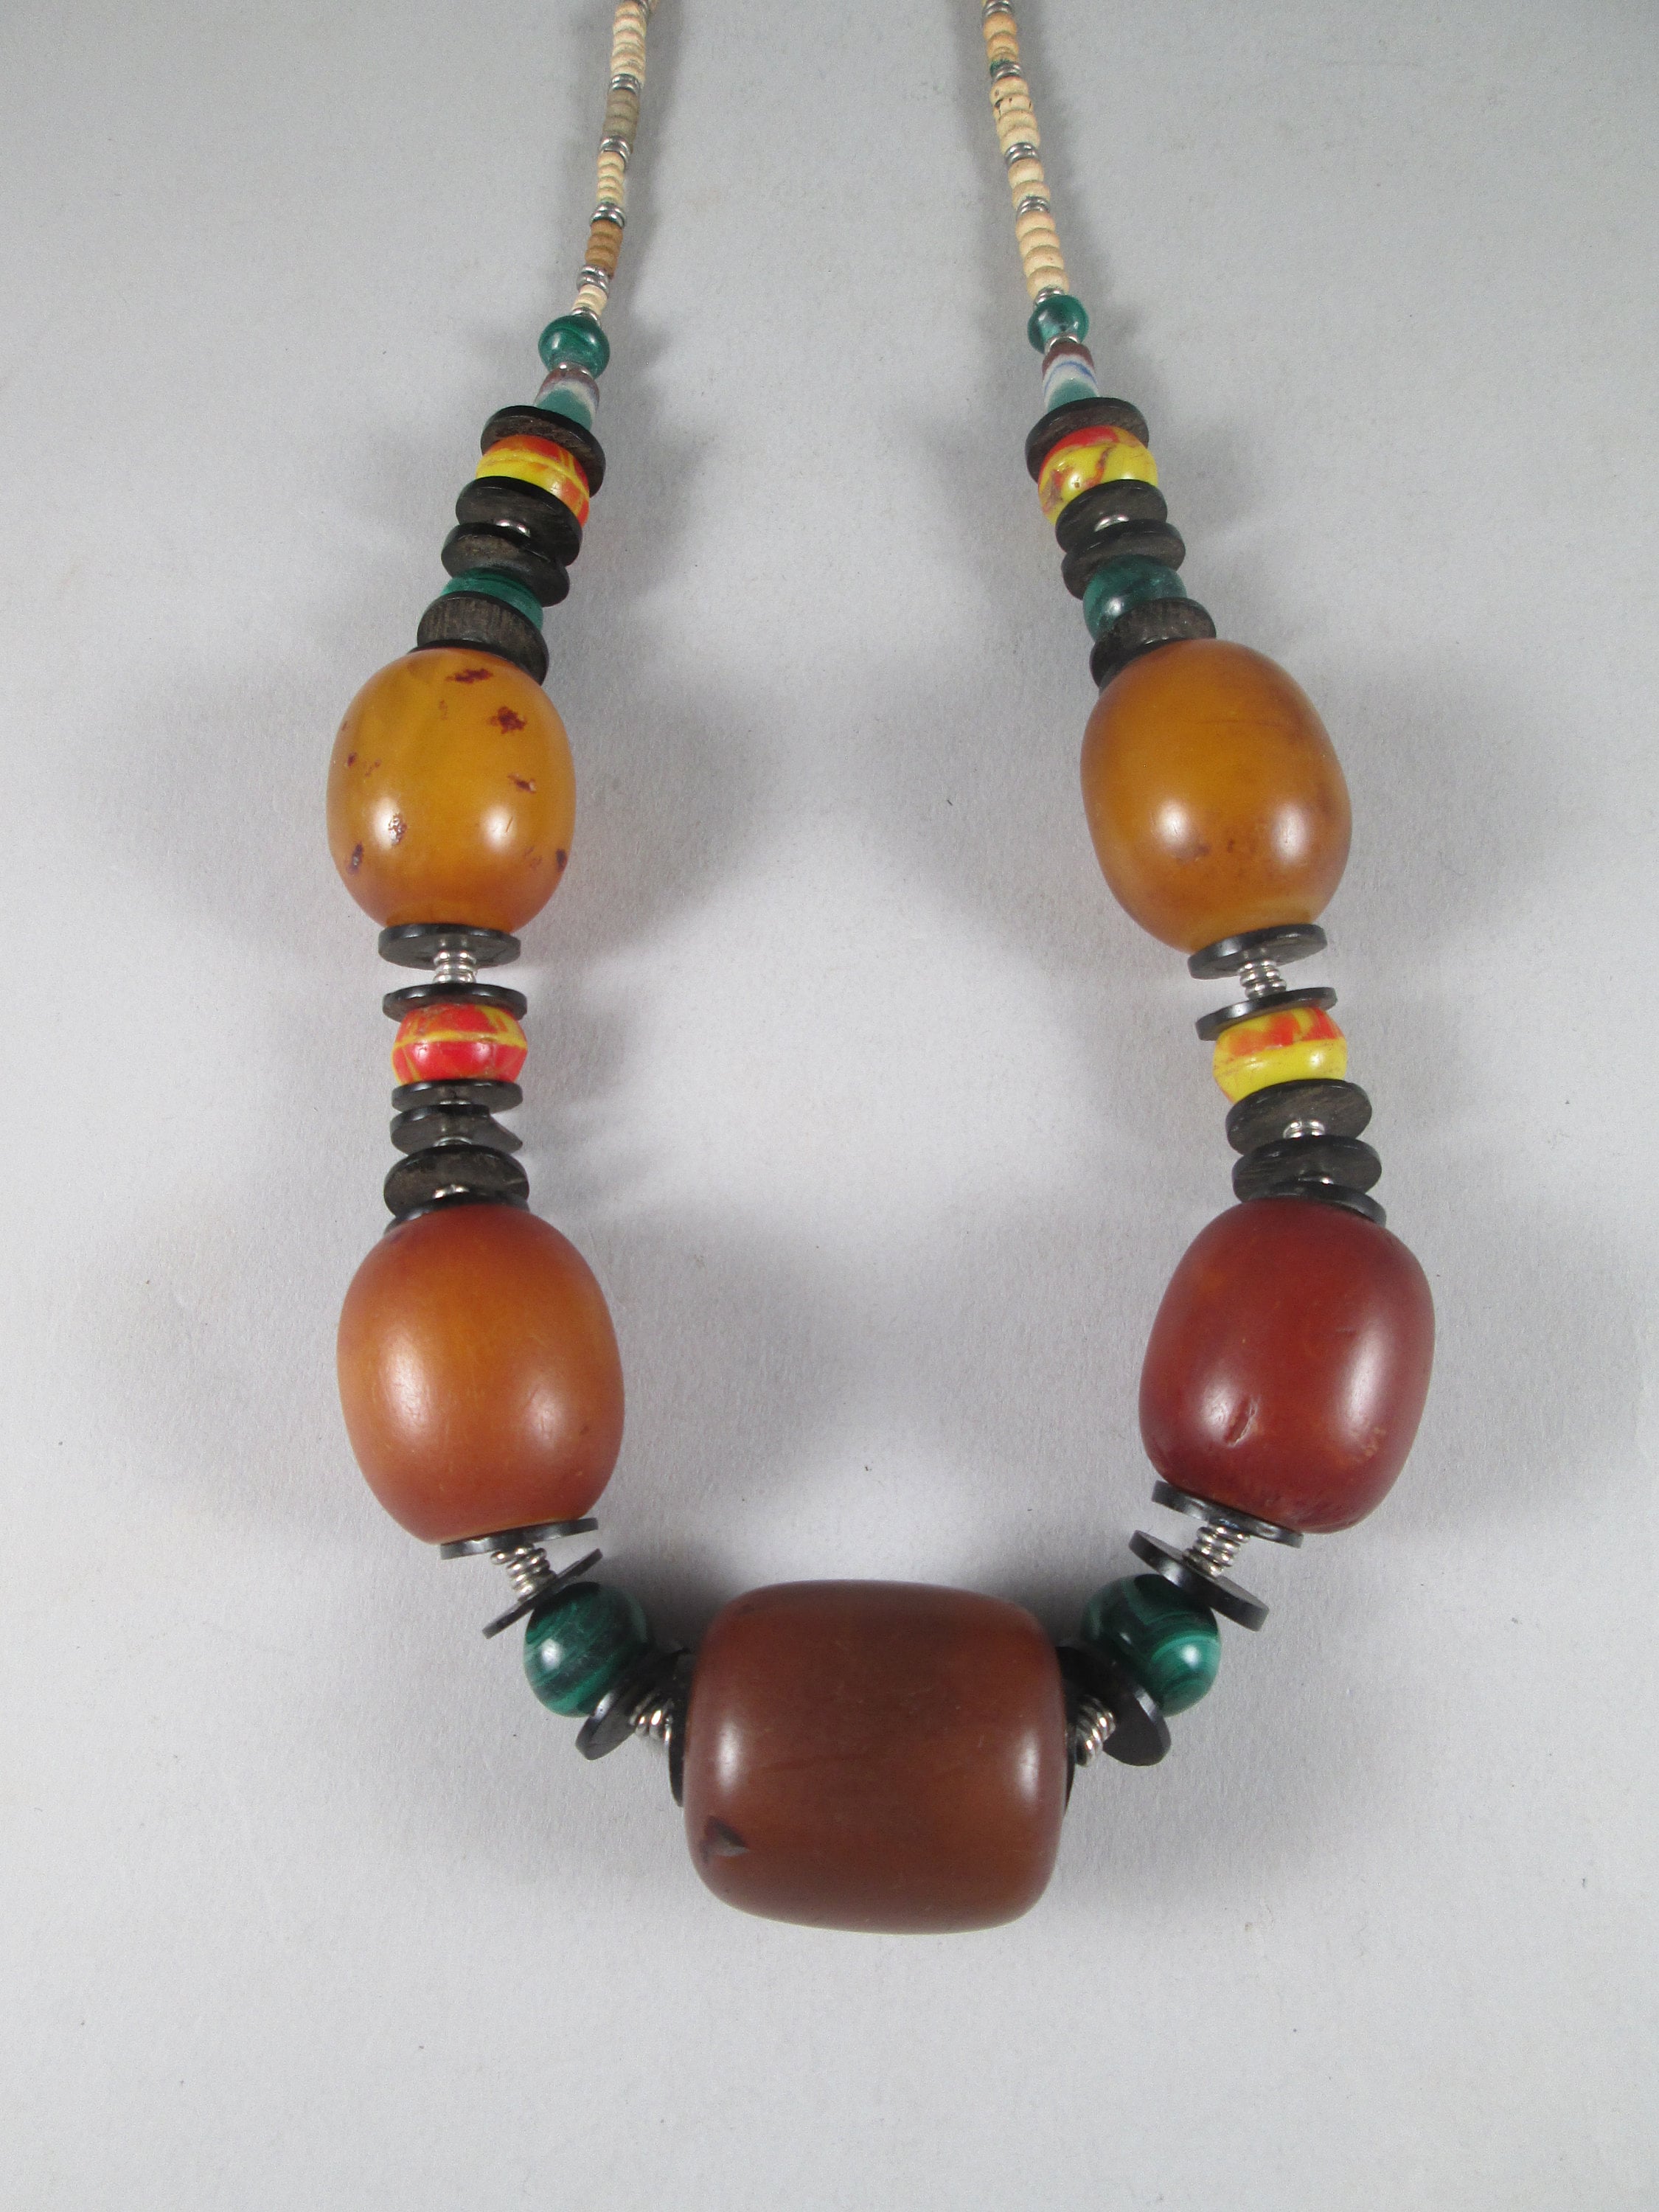 Mens Amber Necklace Made of Honey and Cognac Baltic Amber.